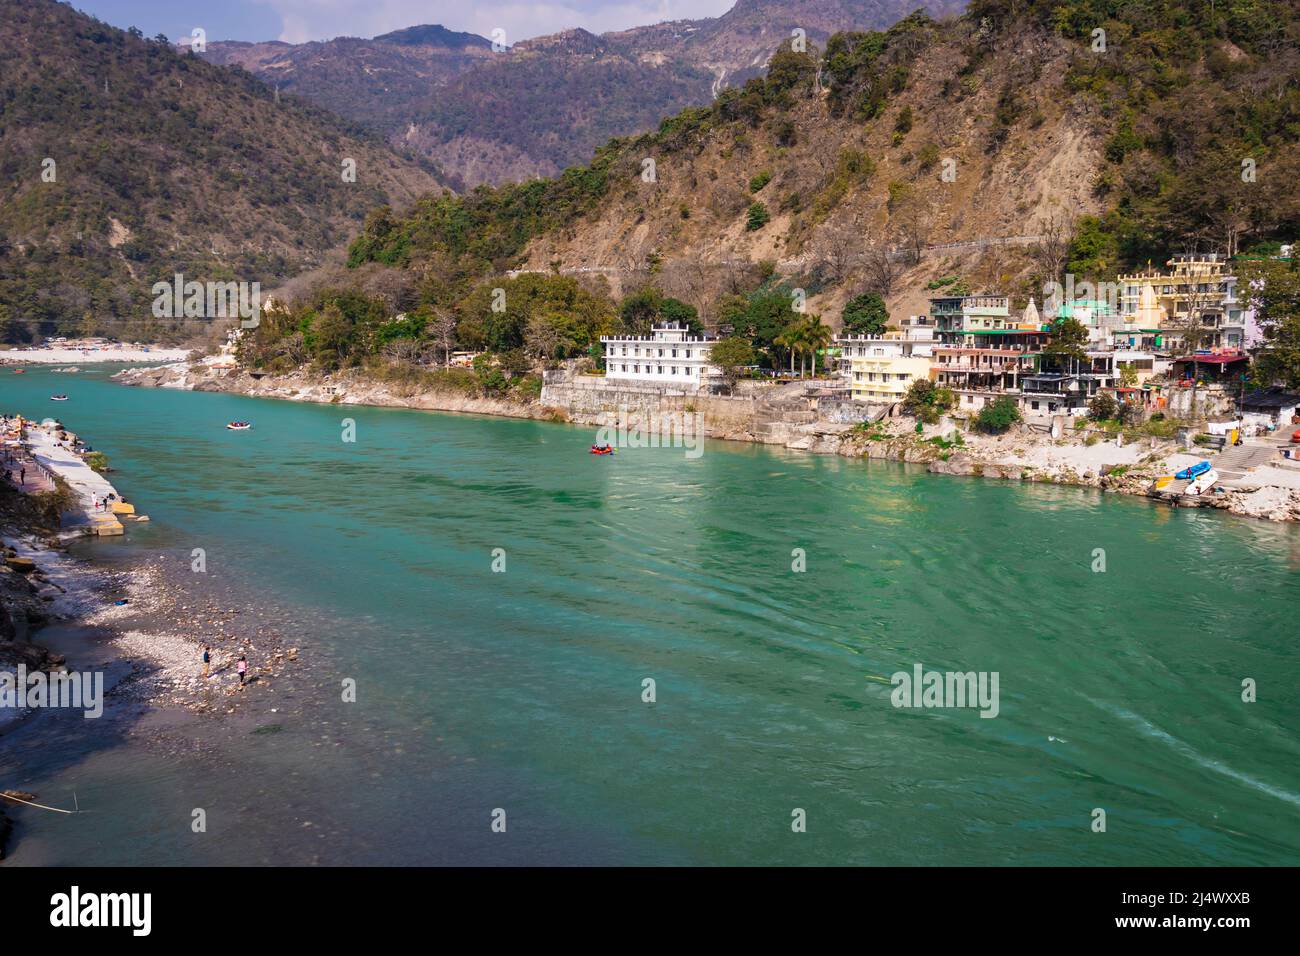 ganges river flowing through mountains with city nestled at riverbank from top angle image is taken at rishikesh uttrakhand india on Mar 15 2022. Stock Photo